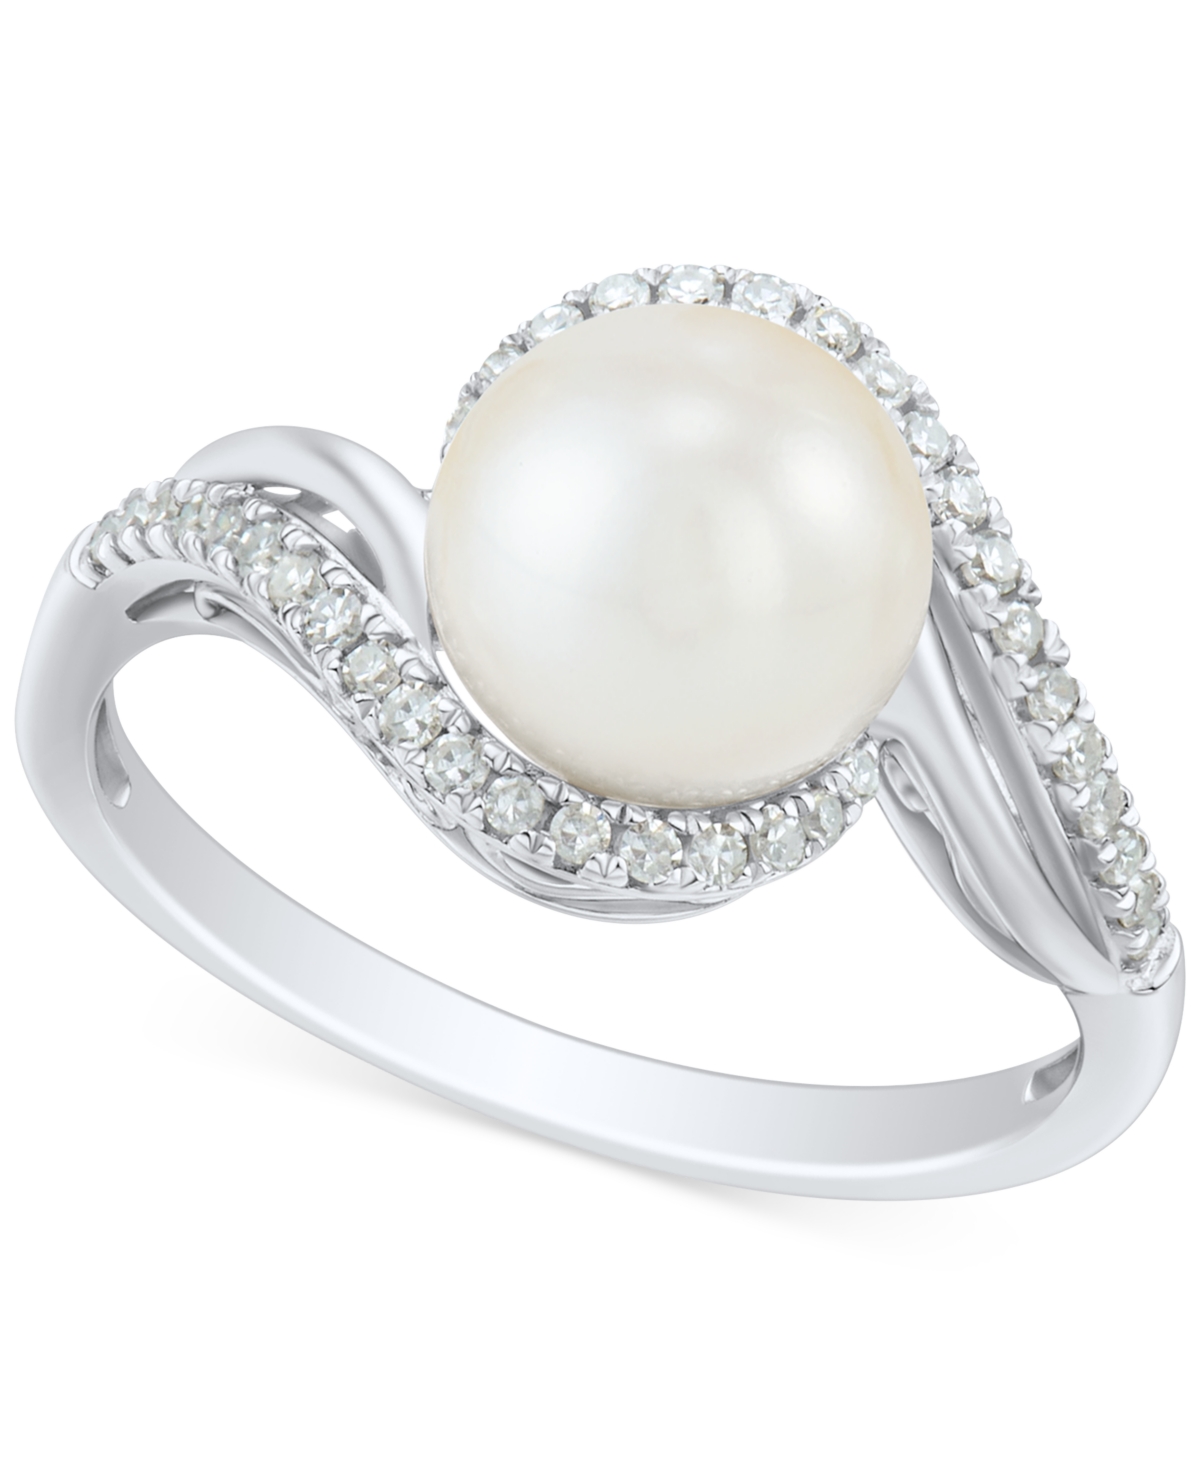 Cultured Freshwater Pearl (8mm) & Diamond (1/5 ct. t.w.) Swirl Ring in 14k White Gold - White Gold